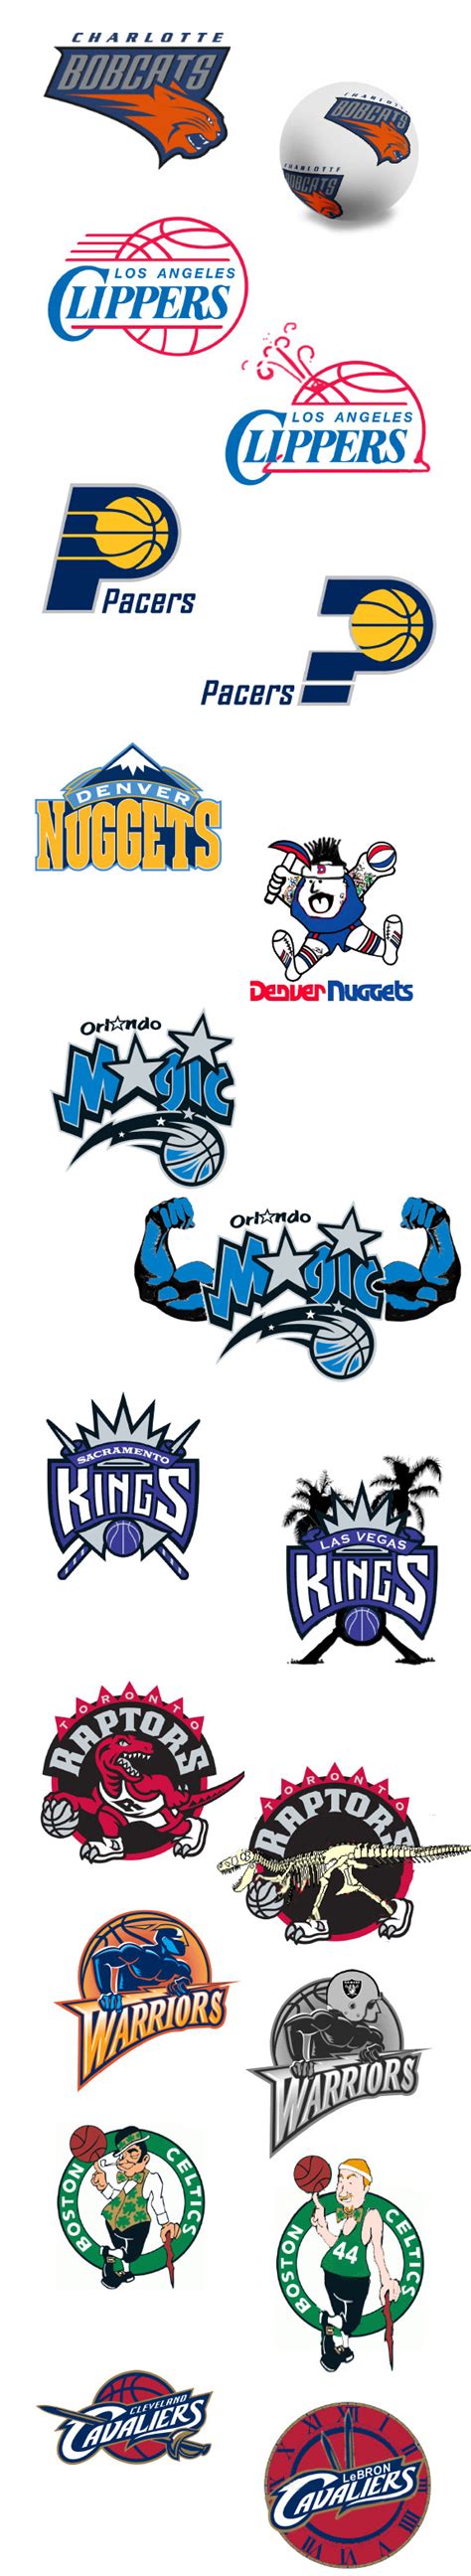 Page 2 Unveils New And Improved Nba Team Logos To Celebrate The Tip Off